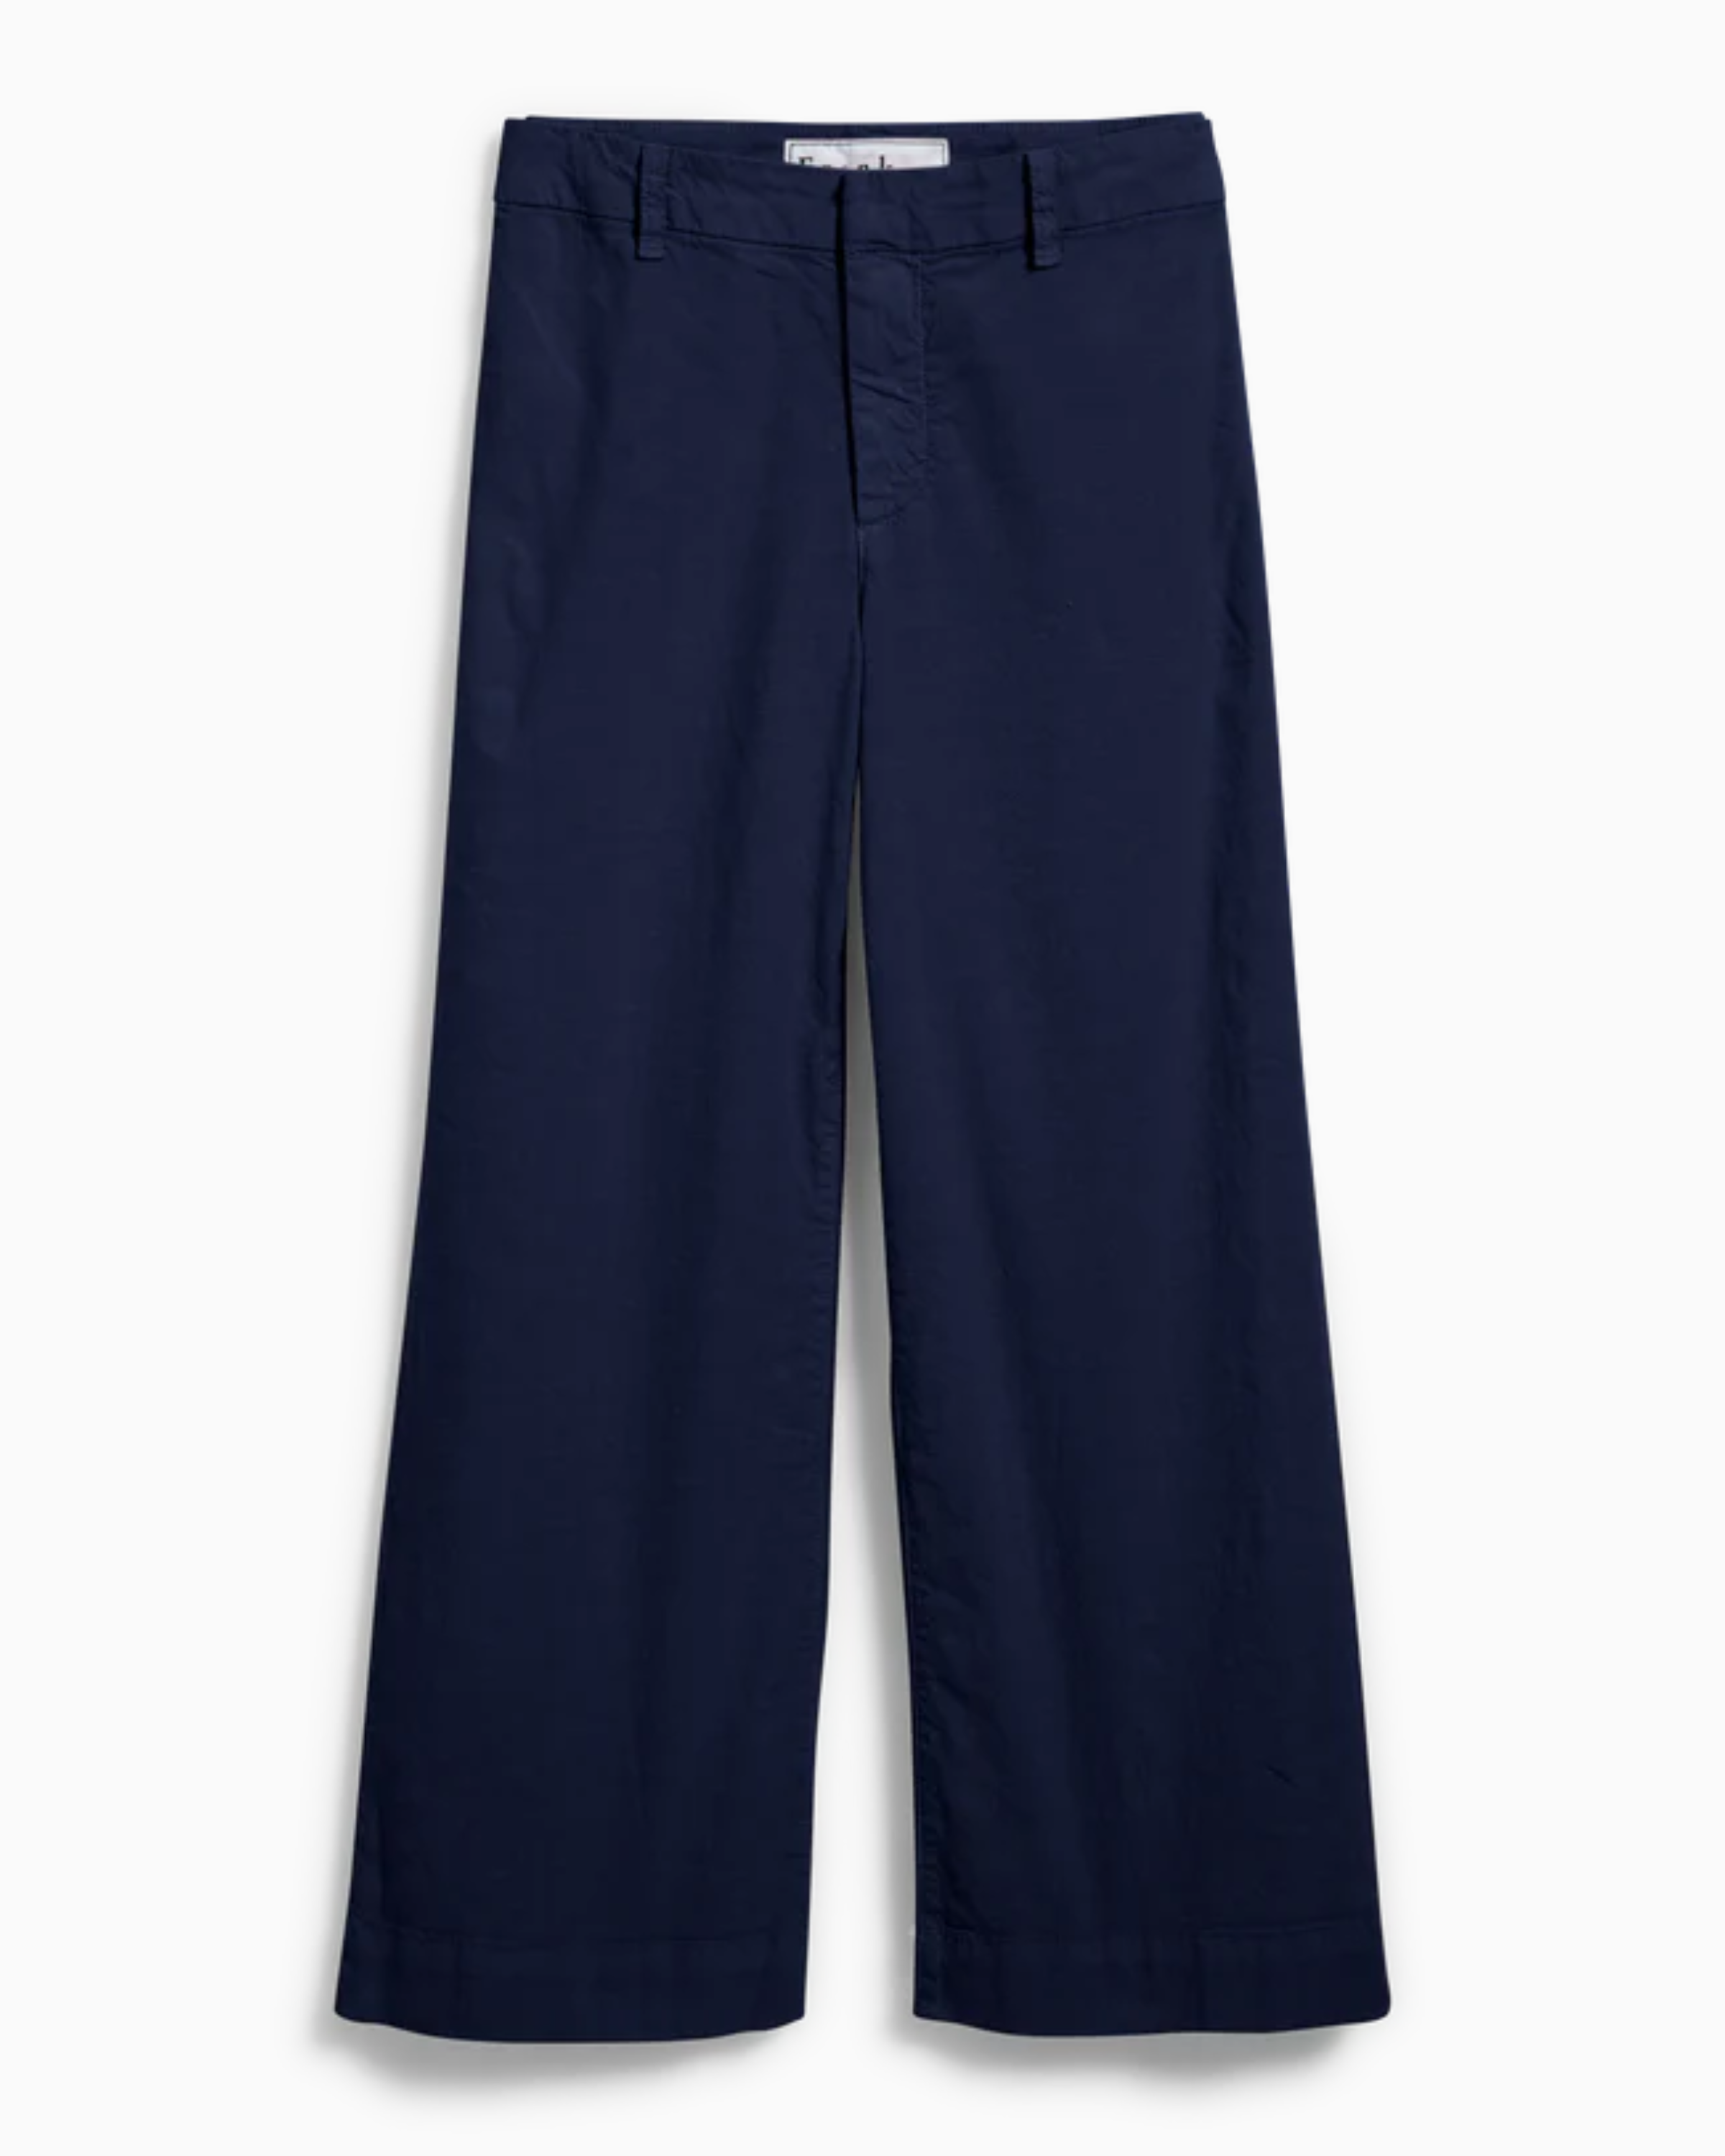 Frank & Eileen Wexford The Trouser in Navy